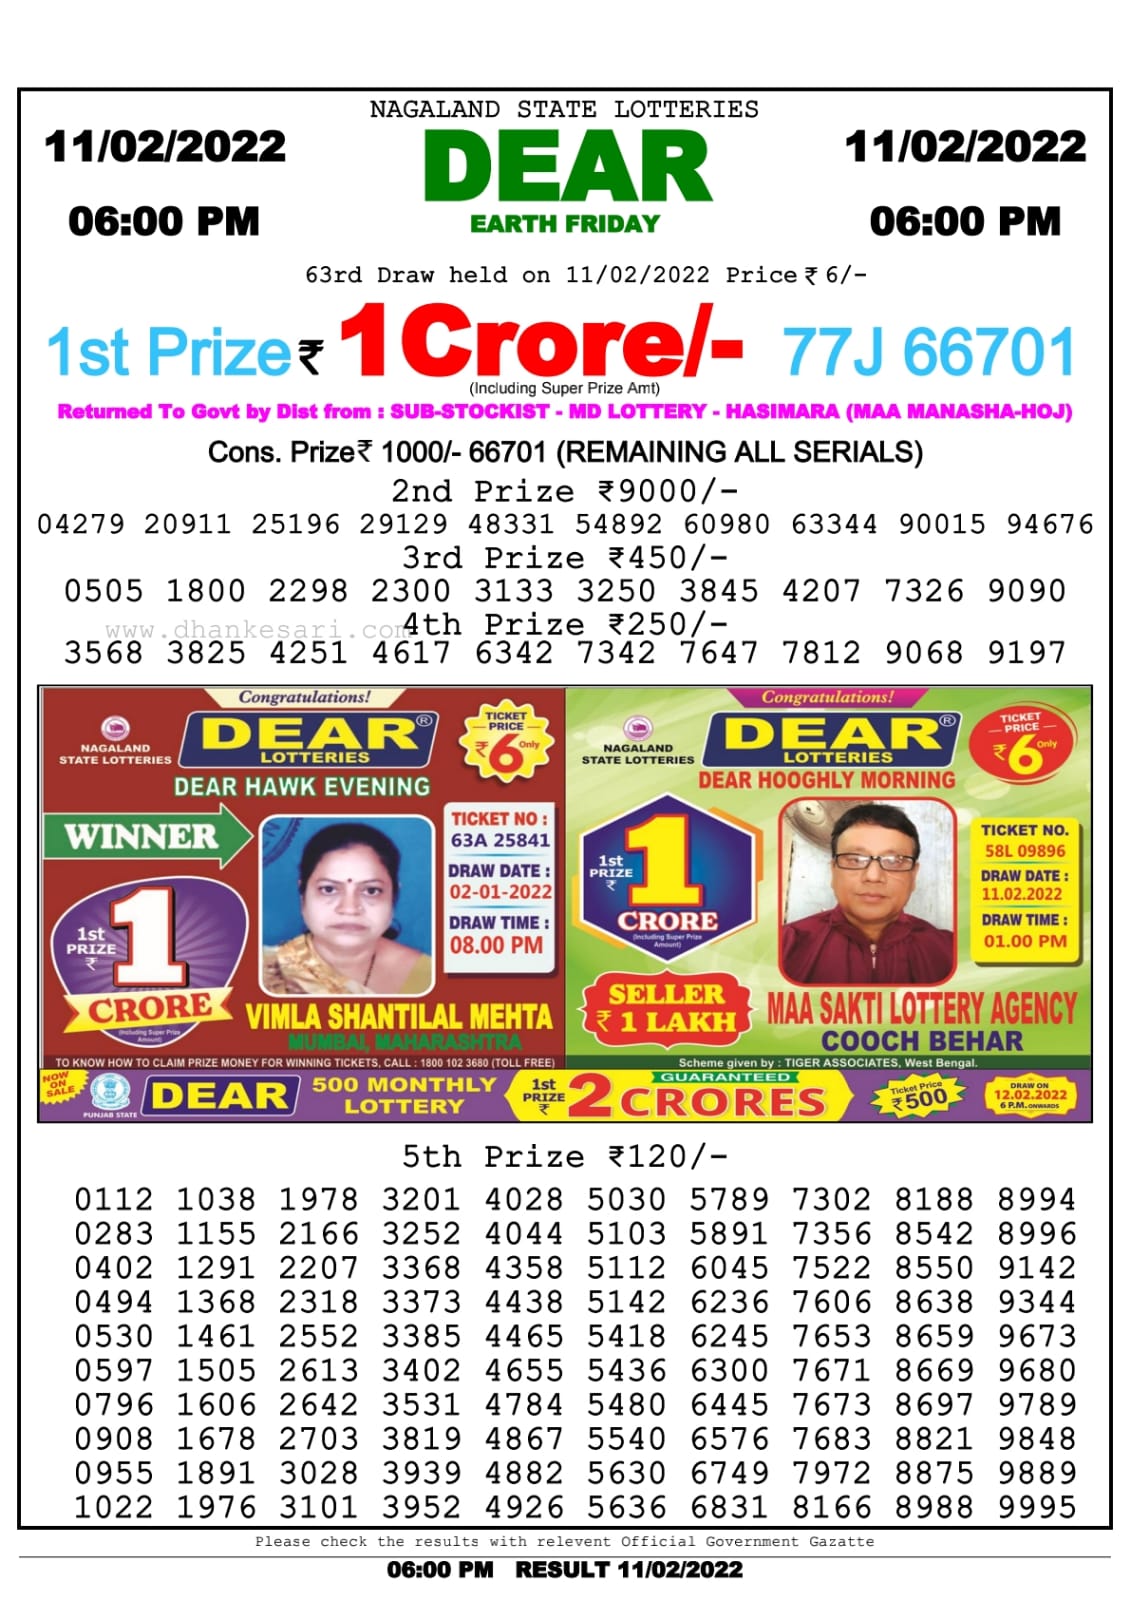 Dear Lottery Nagaland state Lottery Results 6.00 PM 11.02.2022